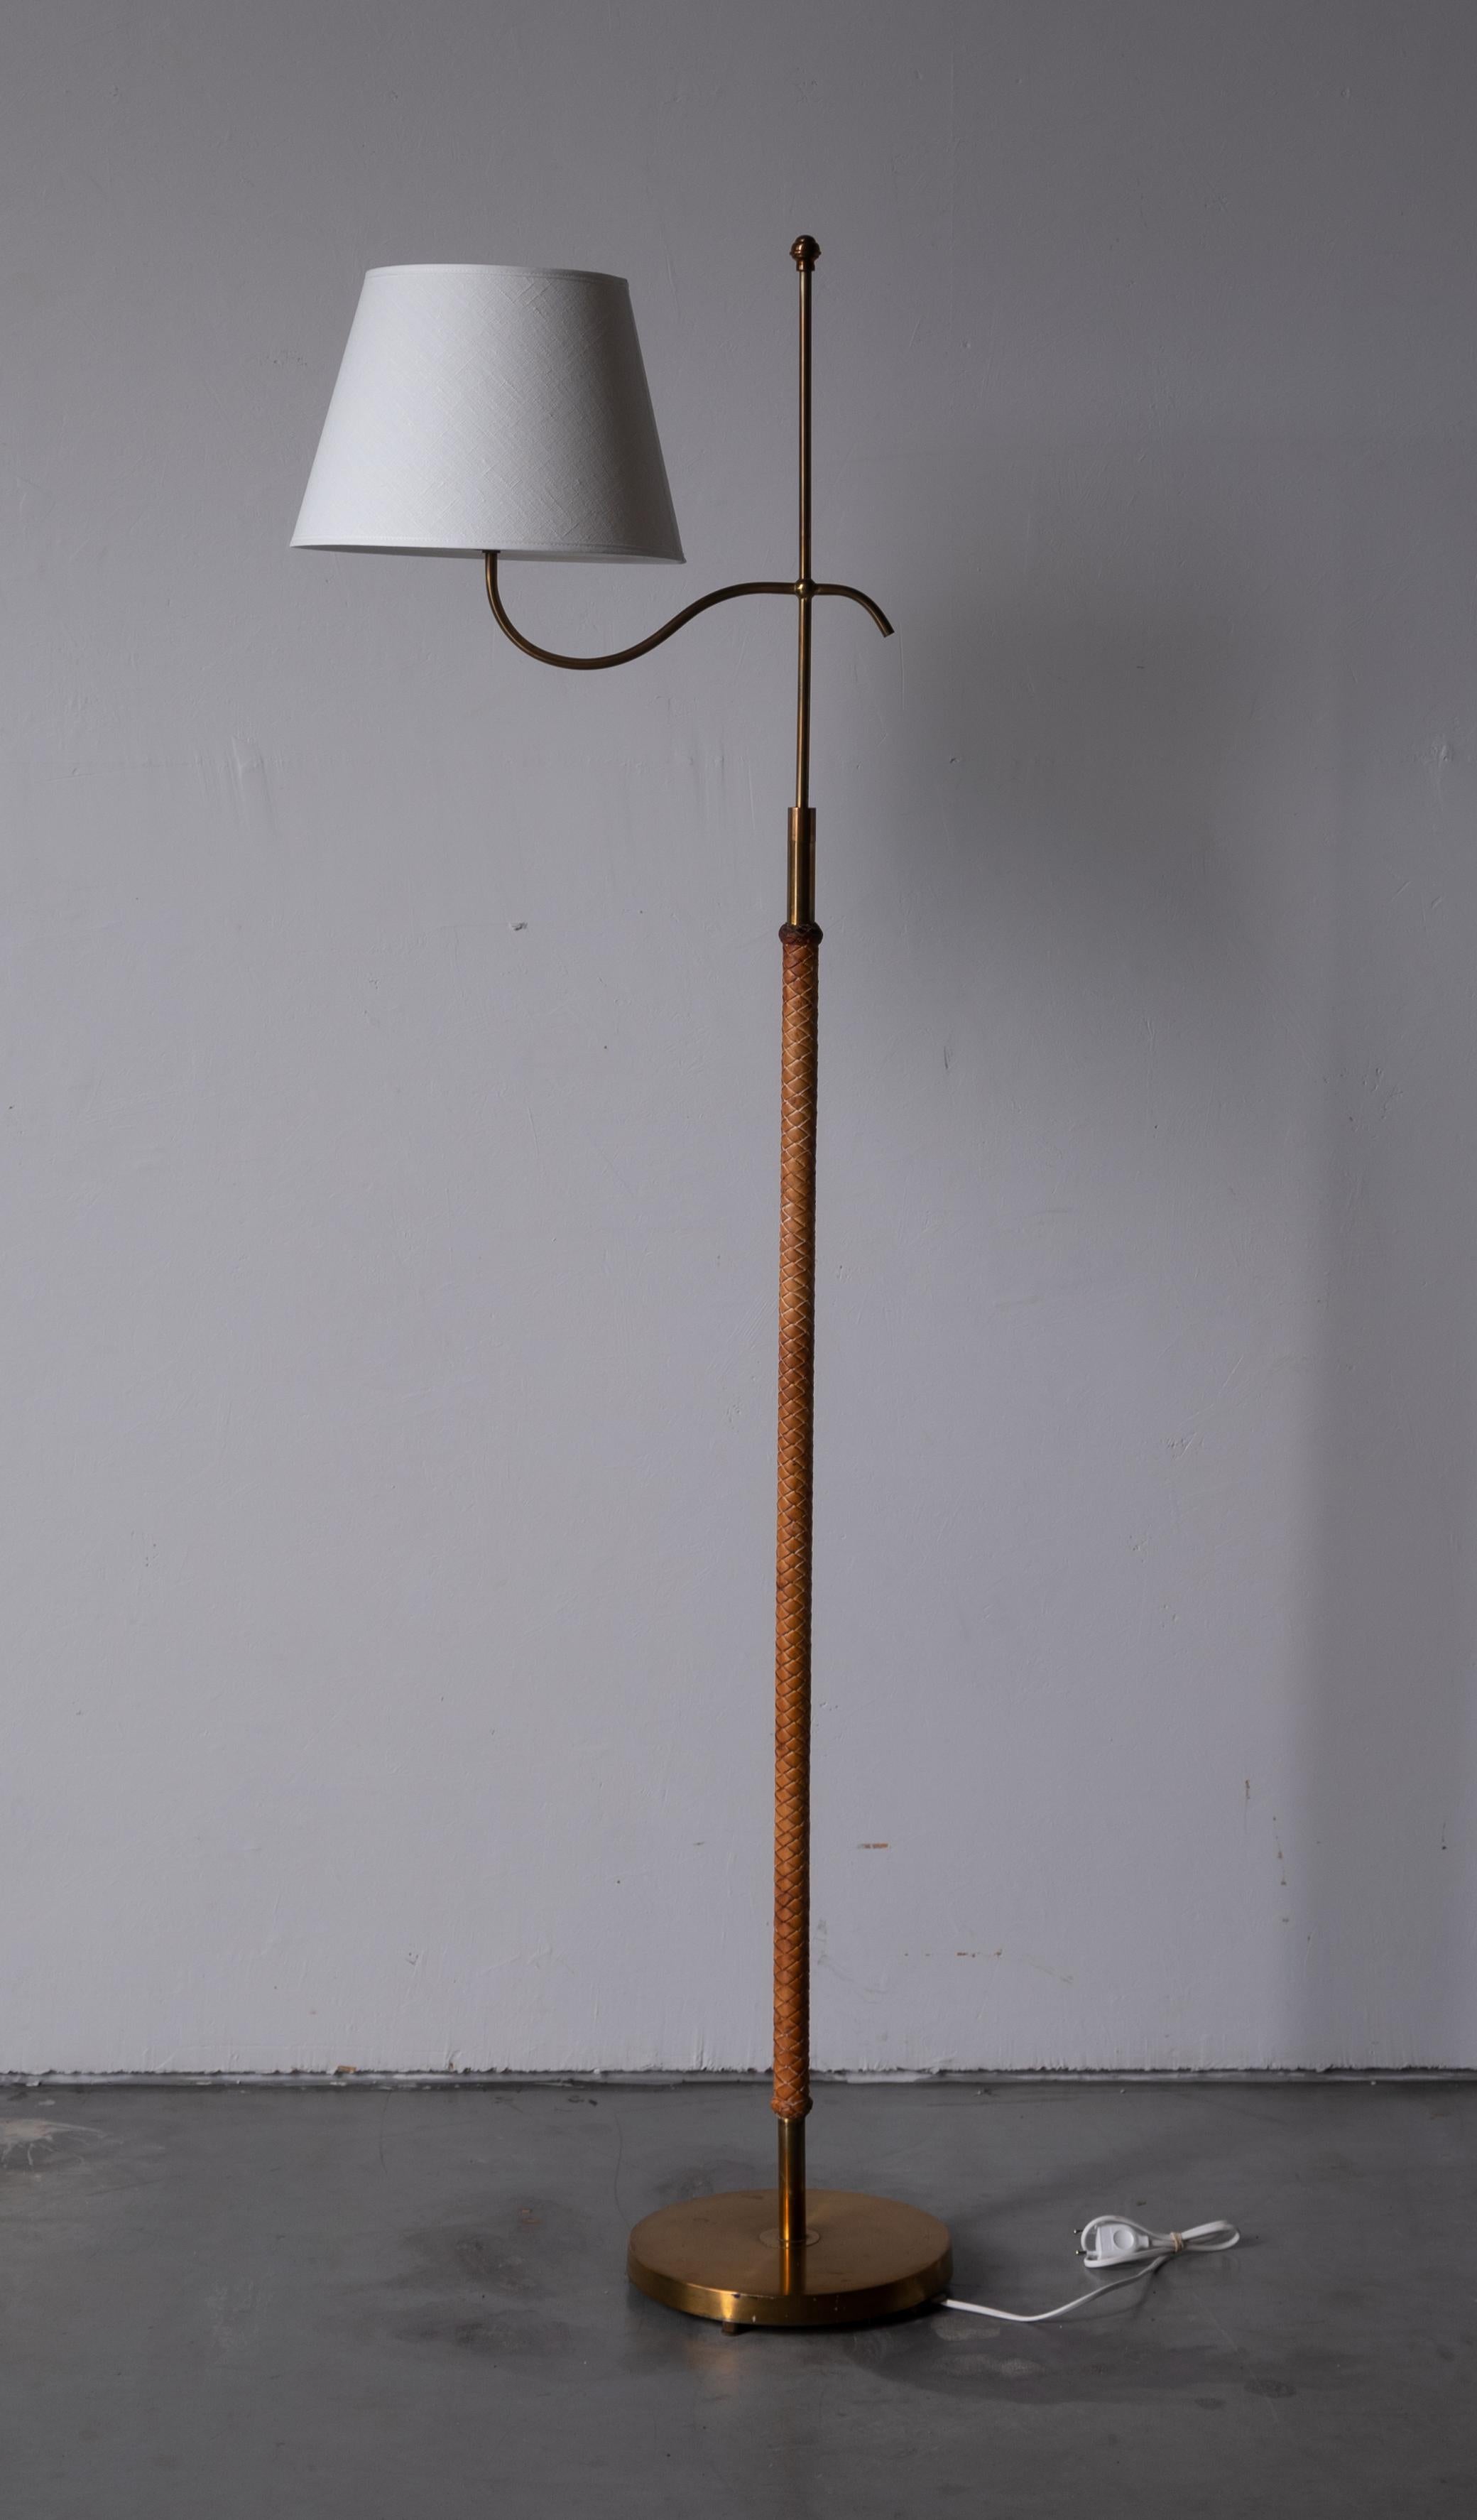 An adjustable floor lamp. In brass, finely braided leather. Production attributed to Böhlmarks, Sweden, 1940s. 

Other designers of the period include Josef Frank, Paavo Tynell, Hans Bergström, Böhlmarks, and Jean Royère.